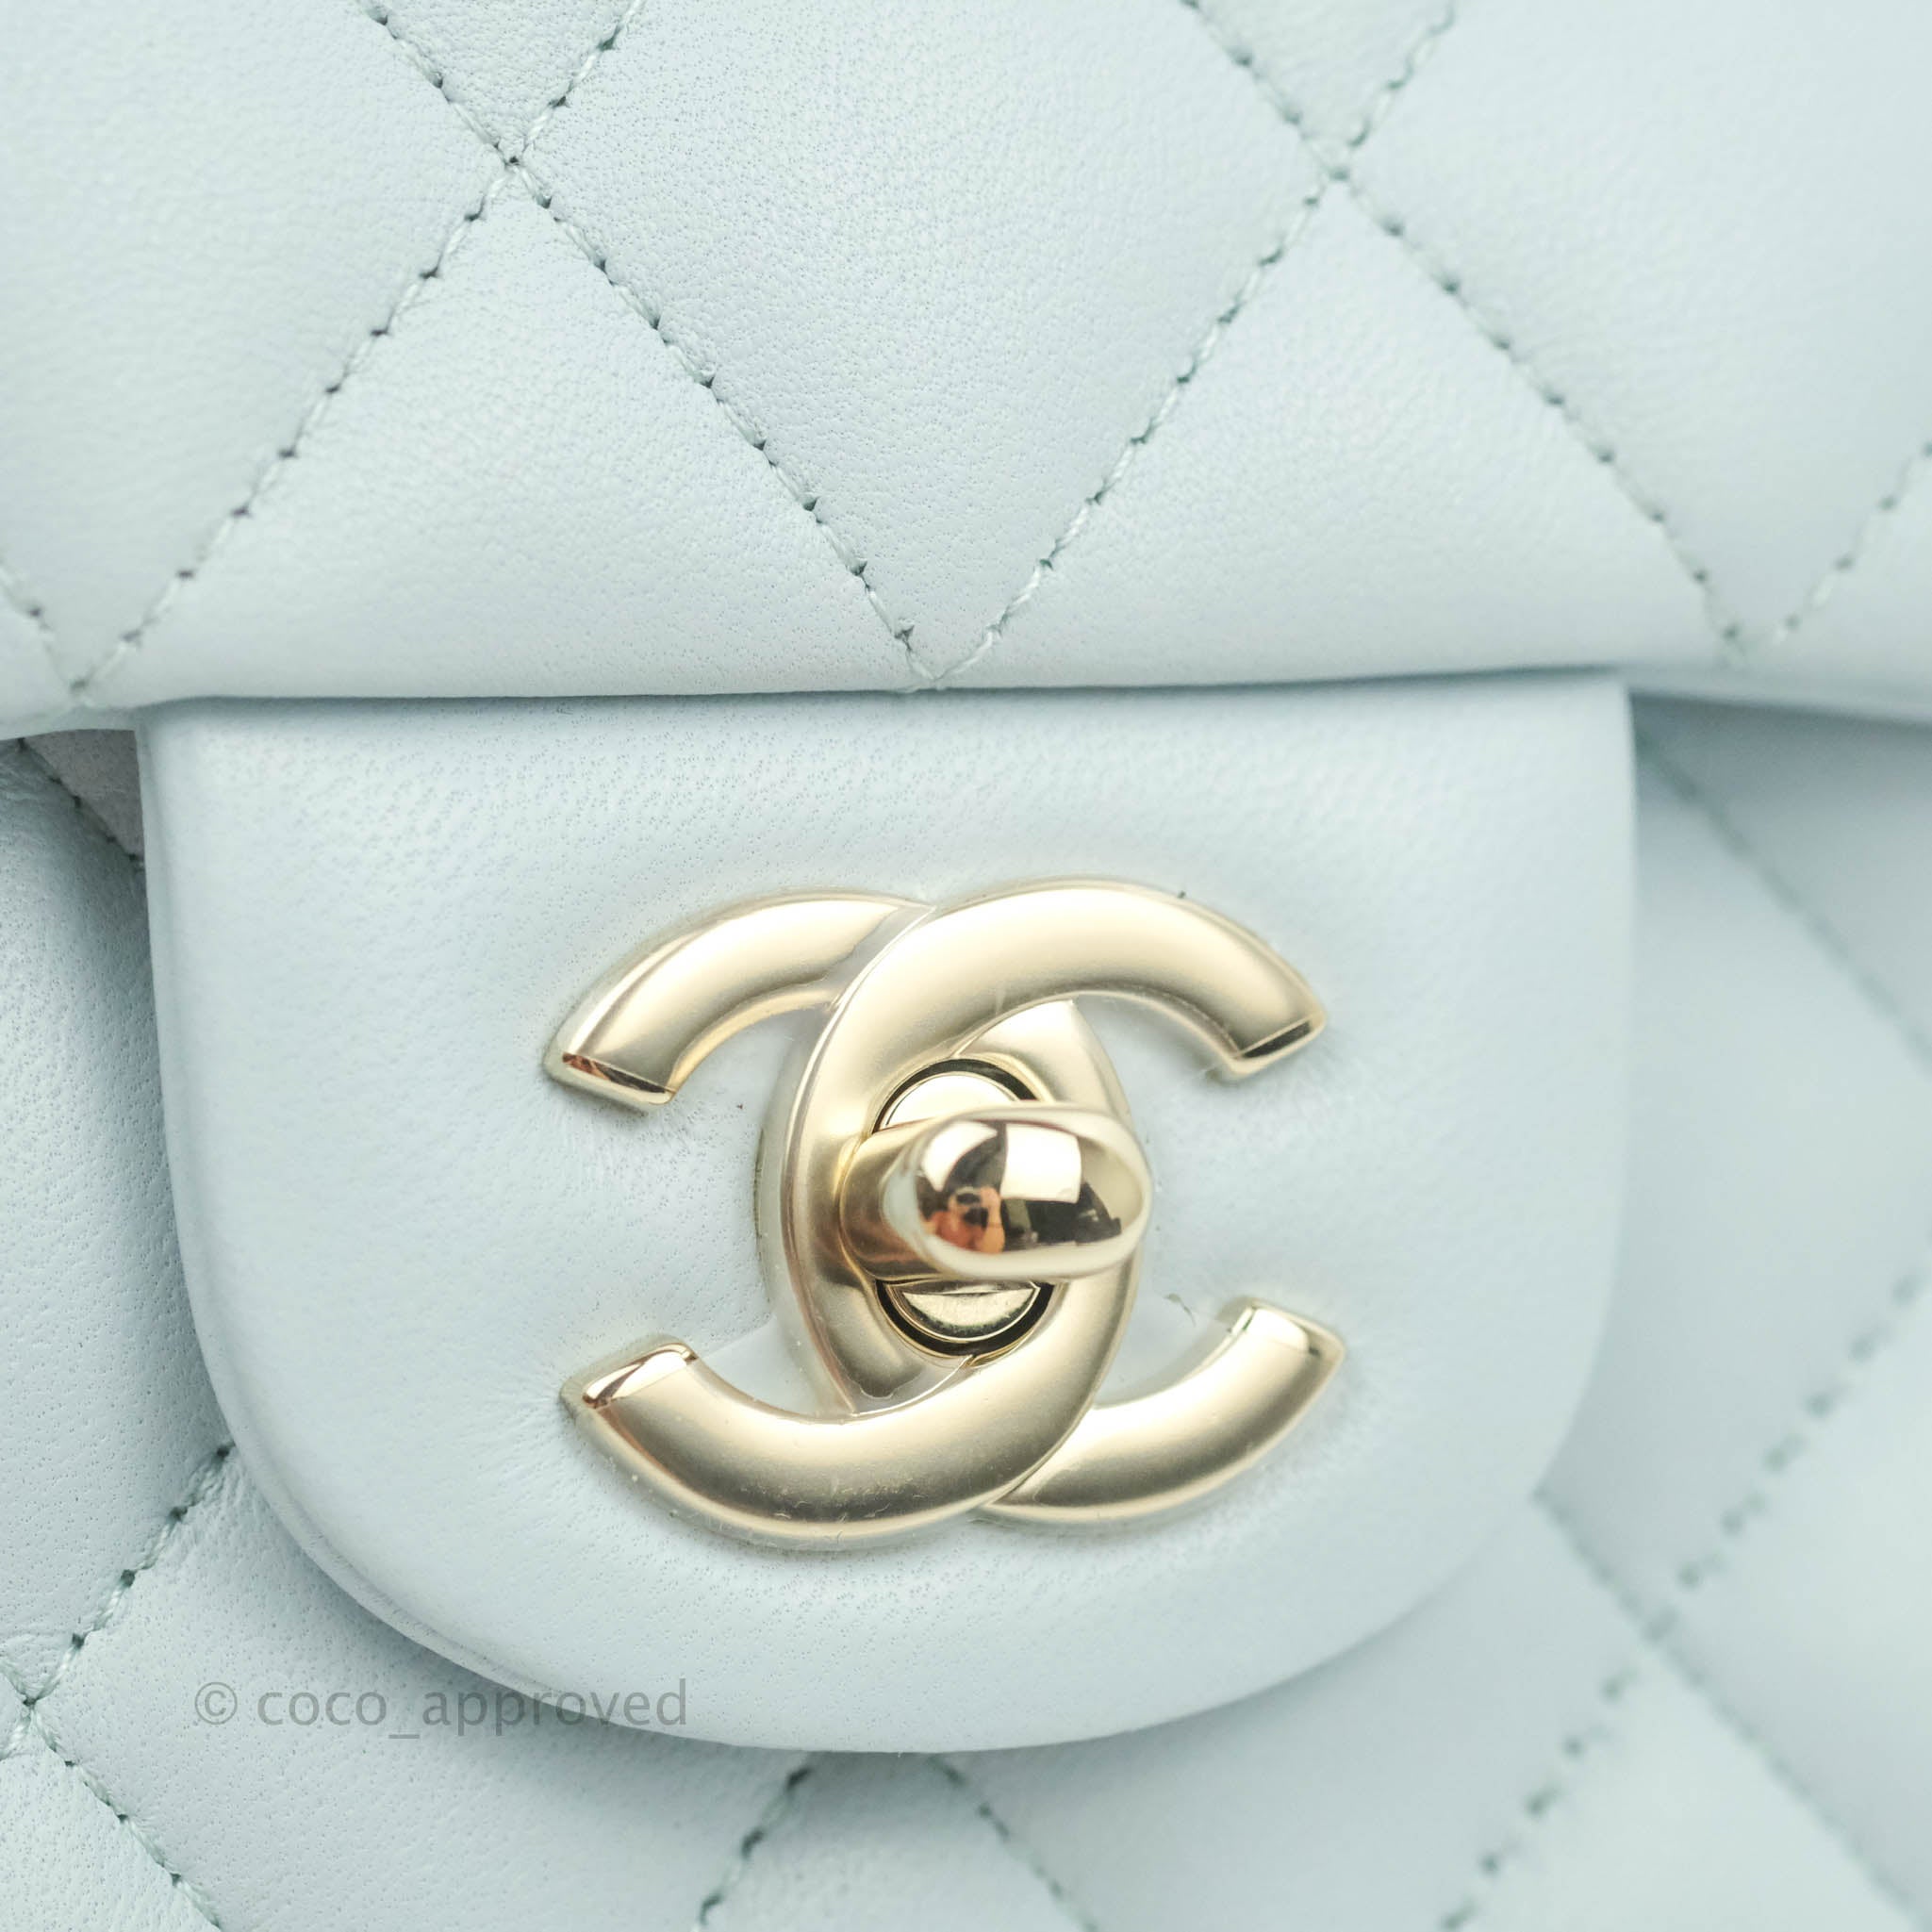 Chanel AS3113B07634 Mini Flap Bag with Enamel and Gold Tone Metal Baby Blue / NG752 Calfskin Shoulder Bags Gbhw